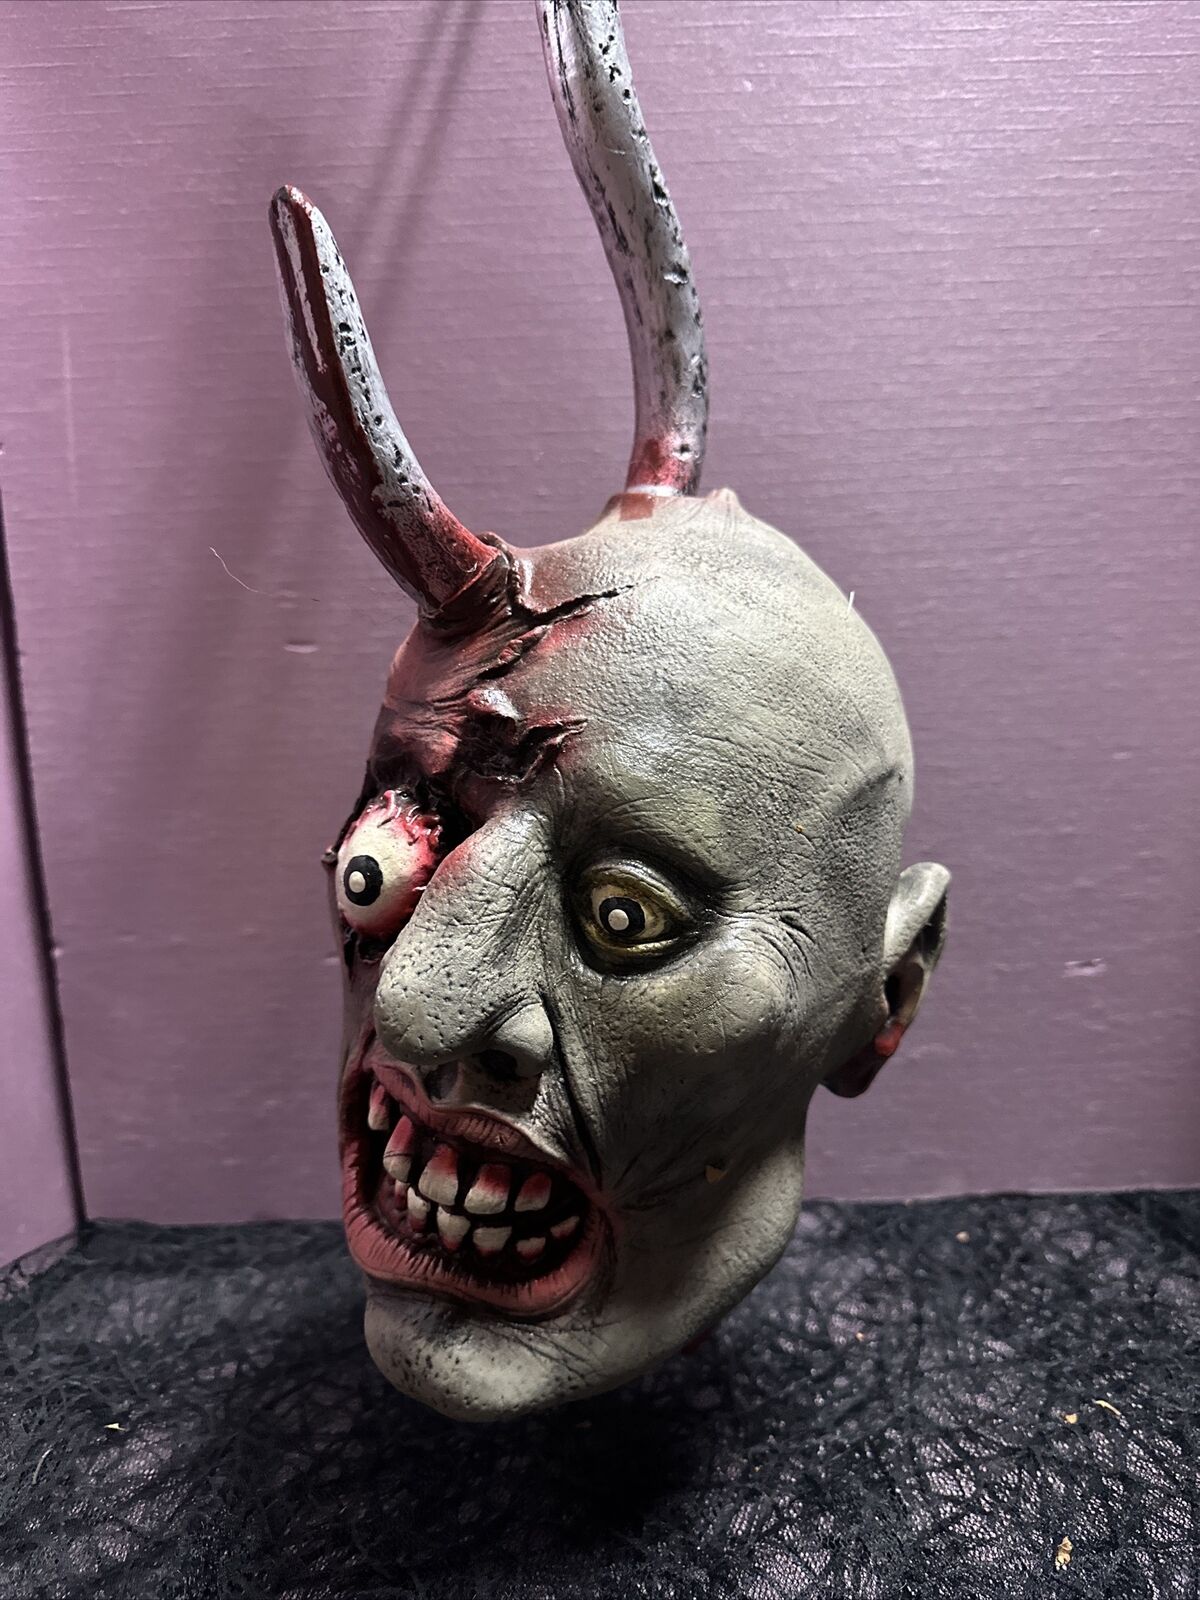 LIFESIZE BLOODY SEVERED HEAD ON A MEAT HOOK HALLOWEEN PROP DISPLAY